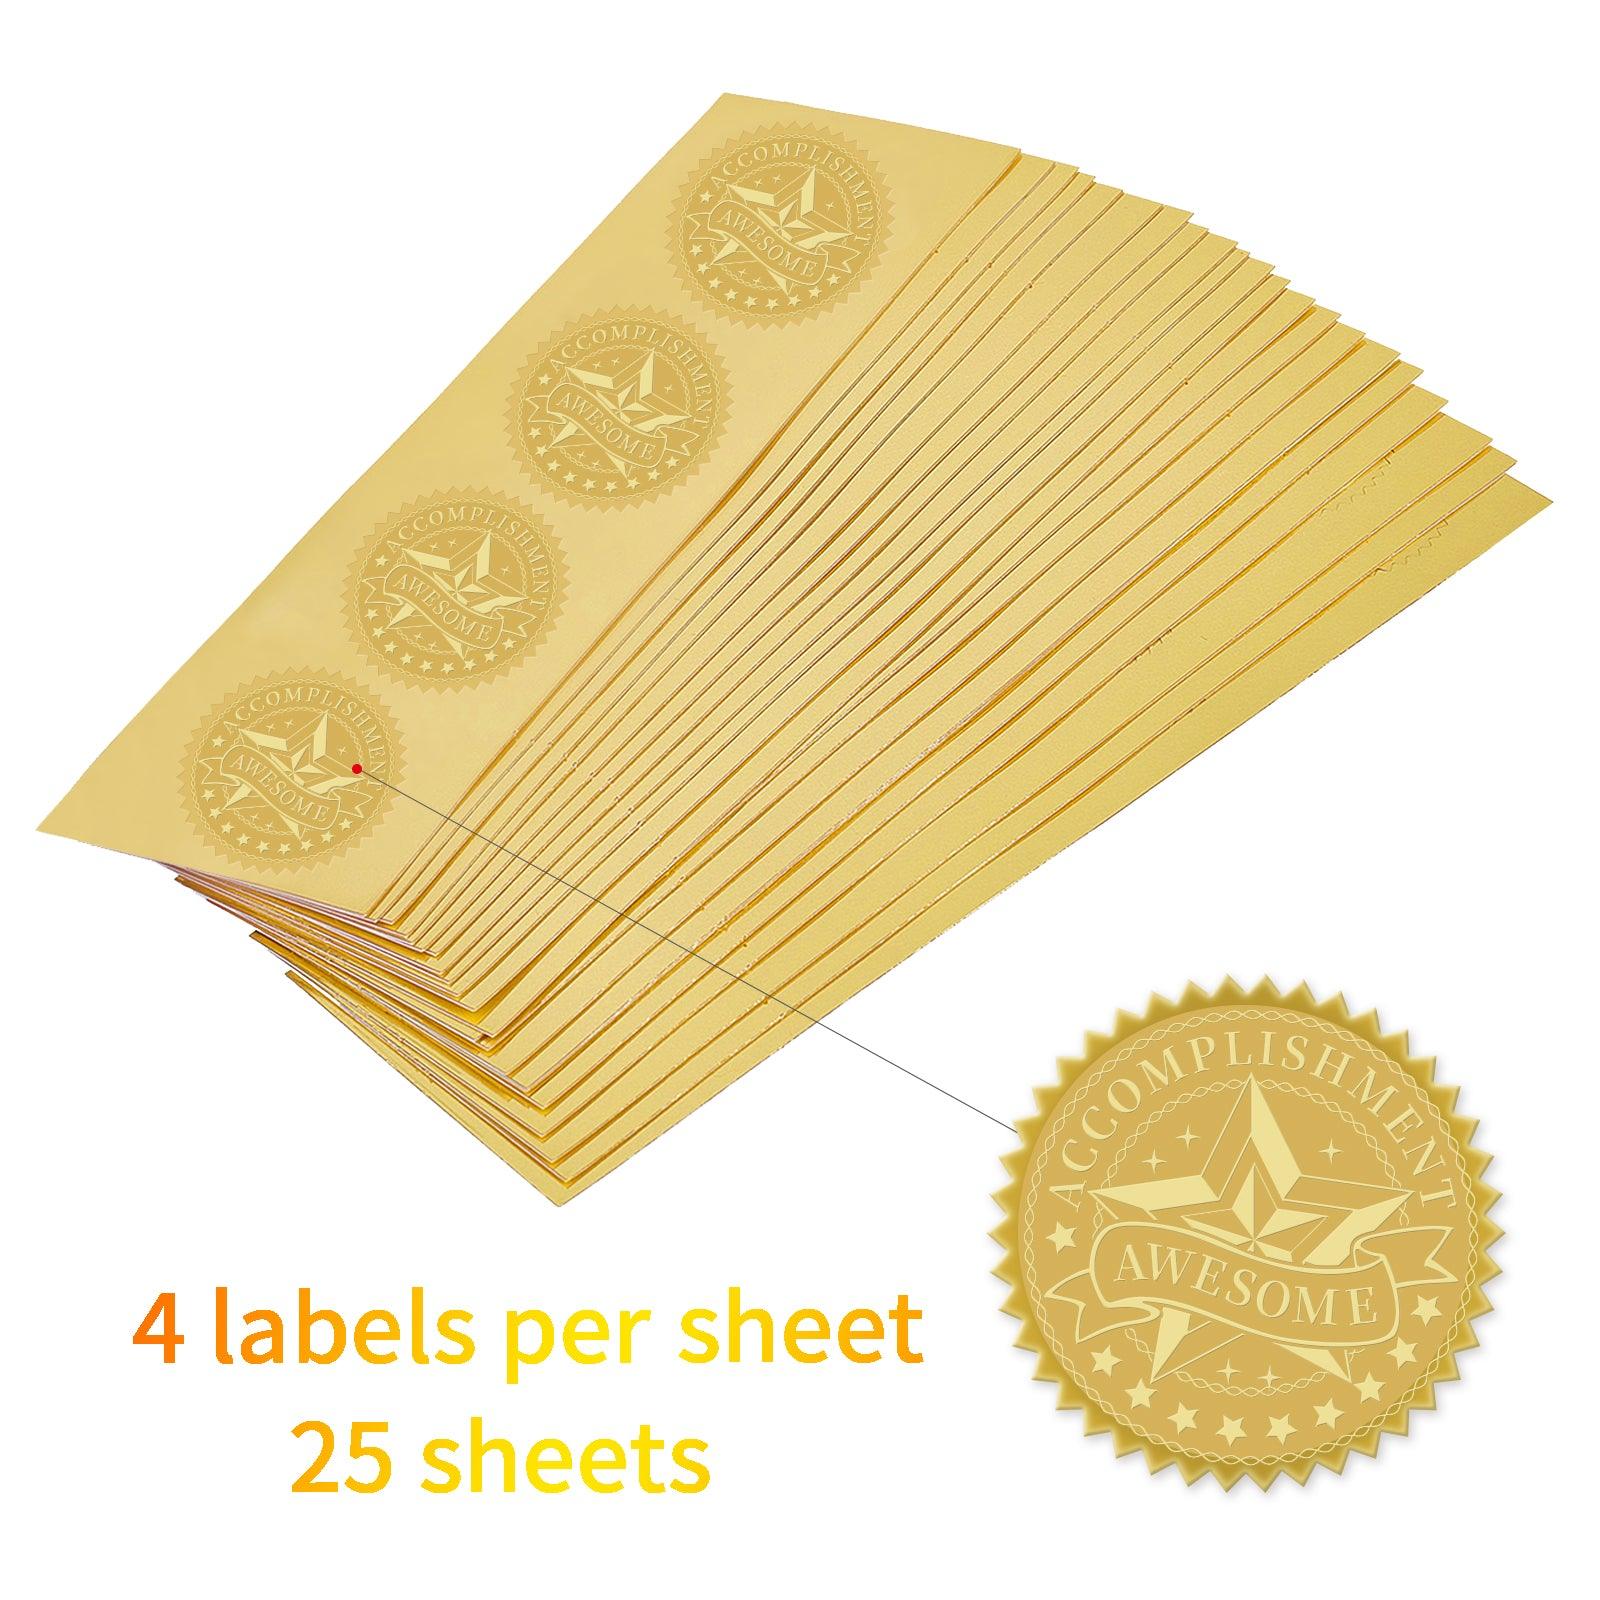 CRASPIRE Gold Foil Certificate Seals Official Seal Excellence Self Adhesive  Embossed Seals Gold Stickers 100pcs Medal Decoration Labels for Envelopes